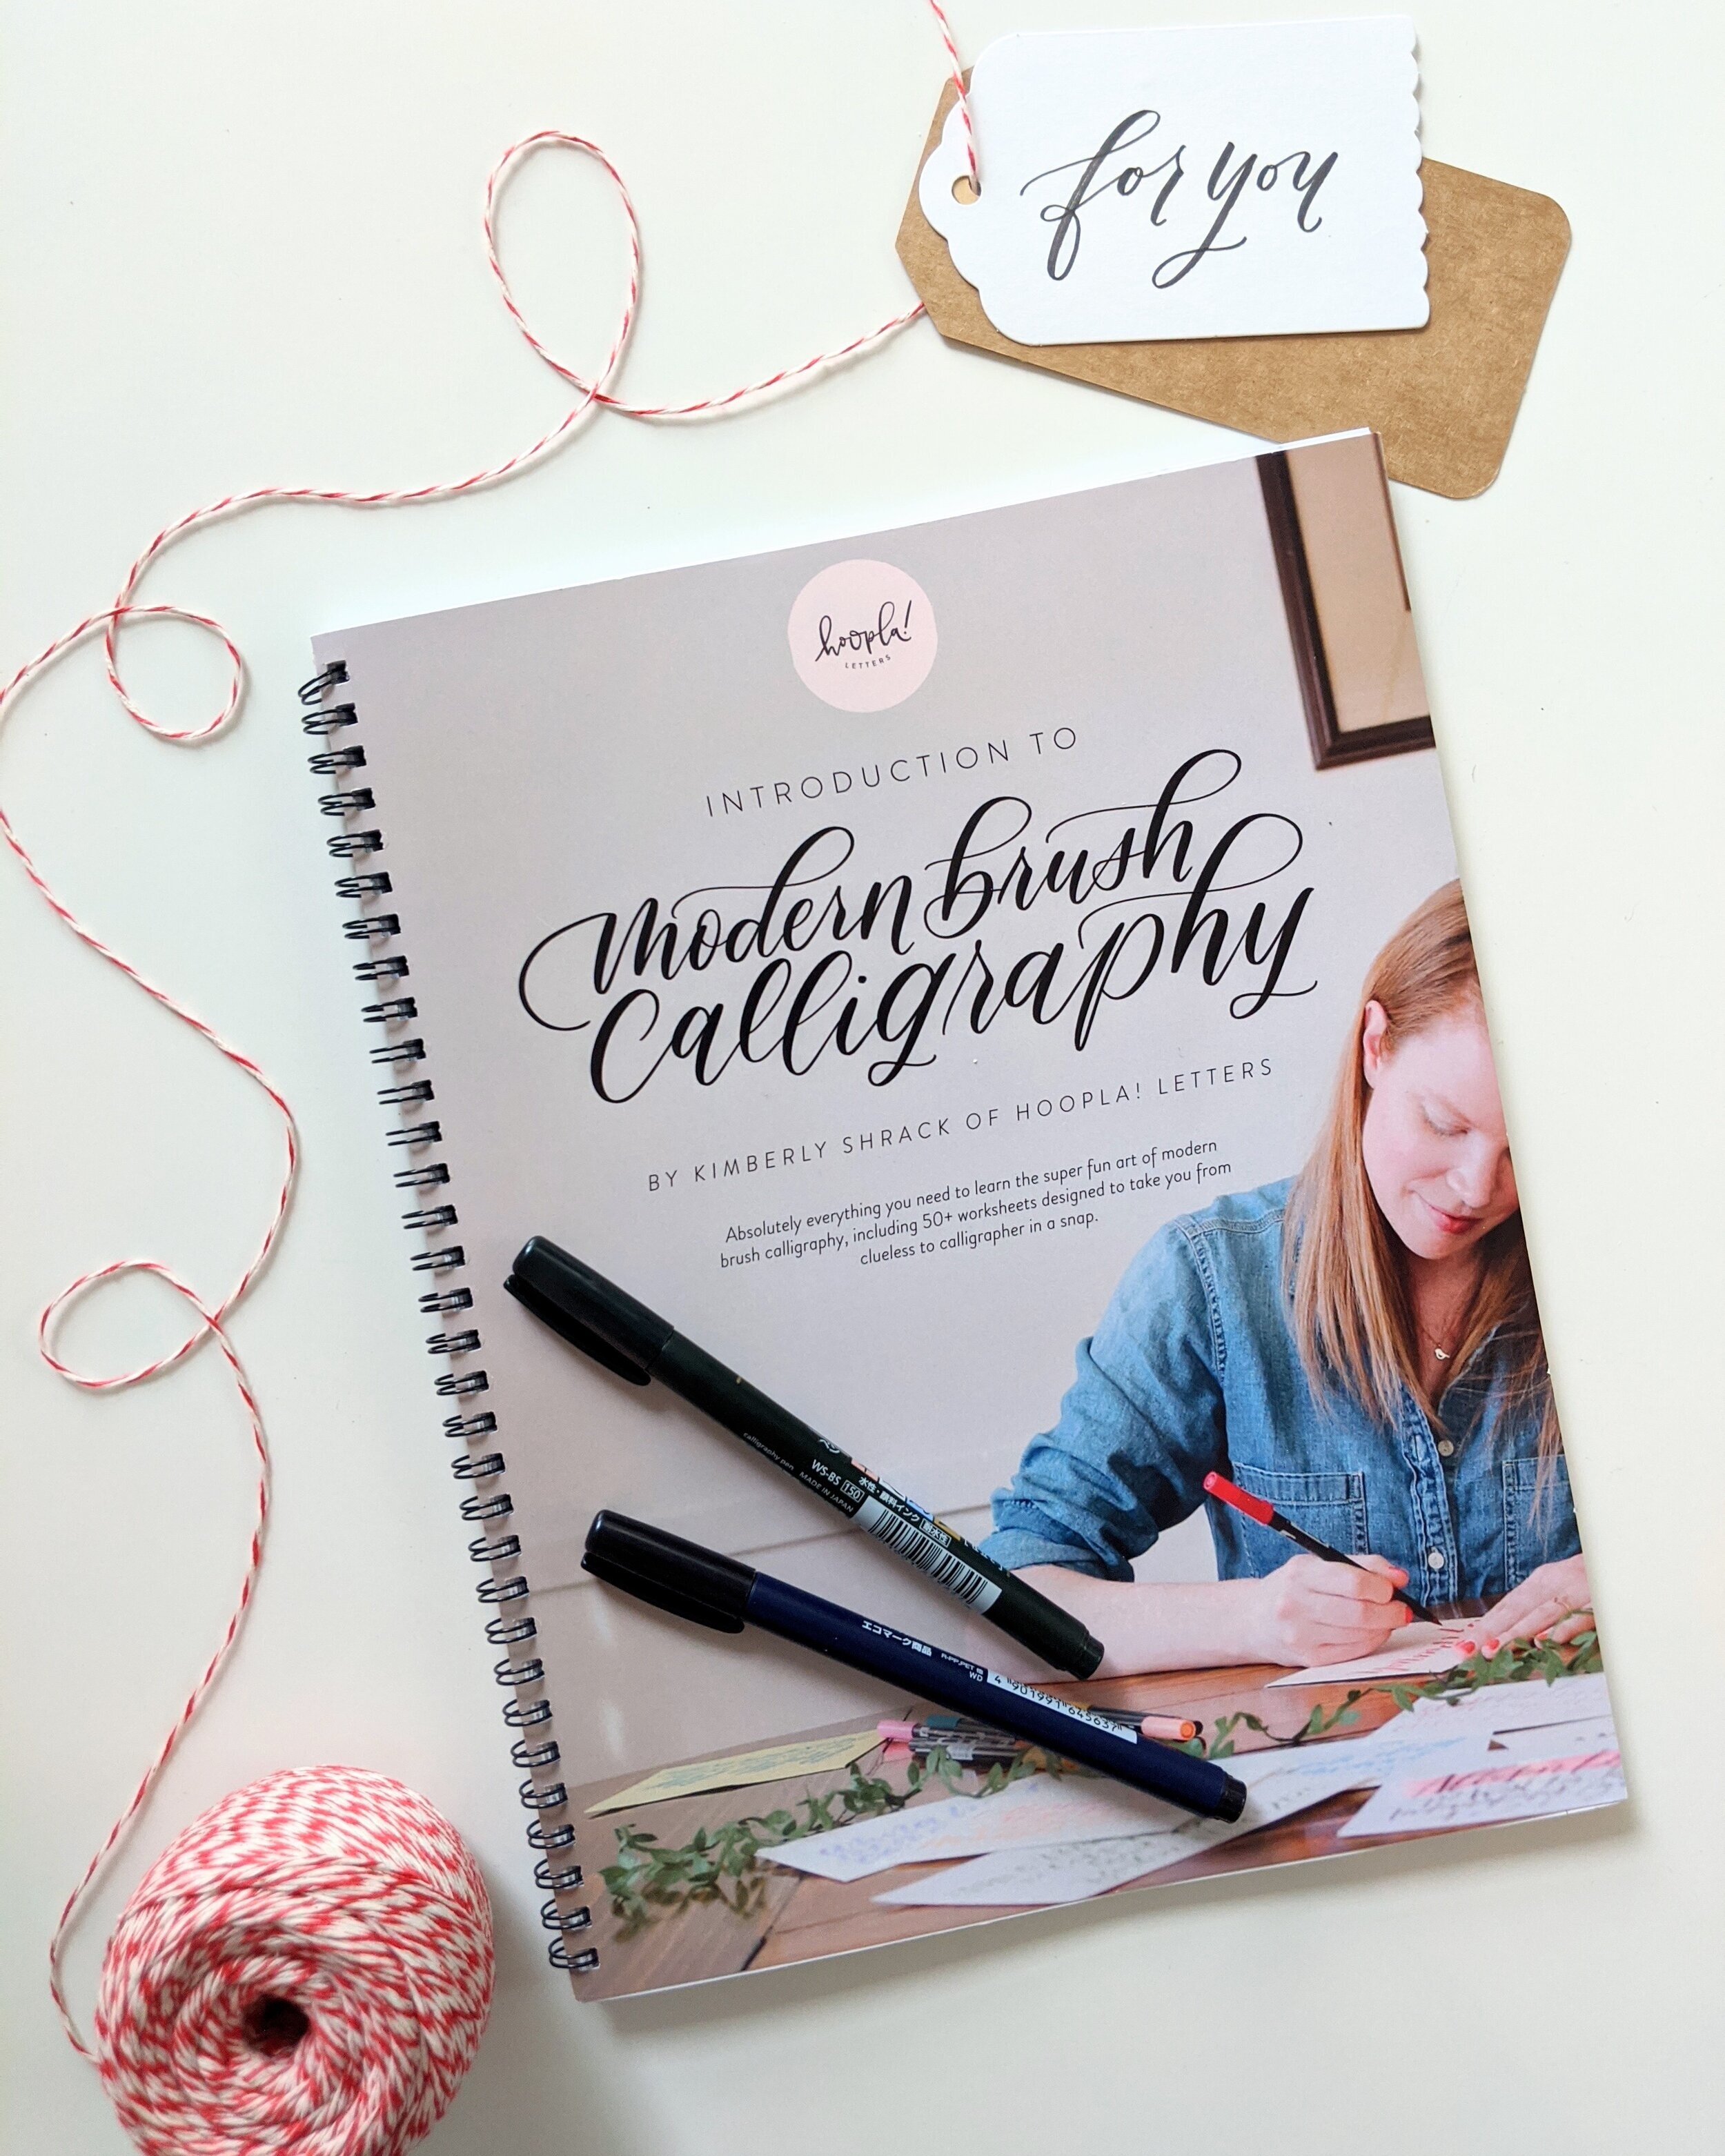 12/2/20: Intro to Crayola Calligraphy, Holiday Edition — Hoopla! Letters